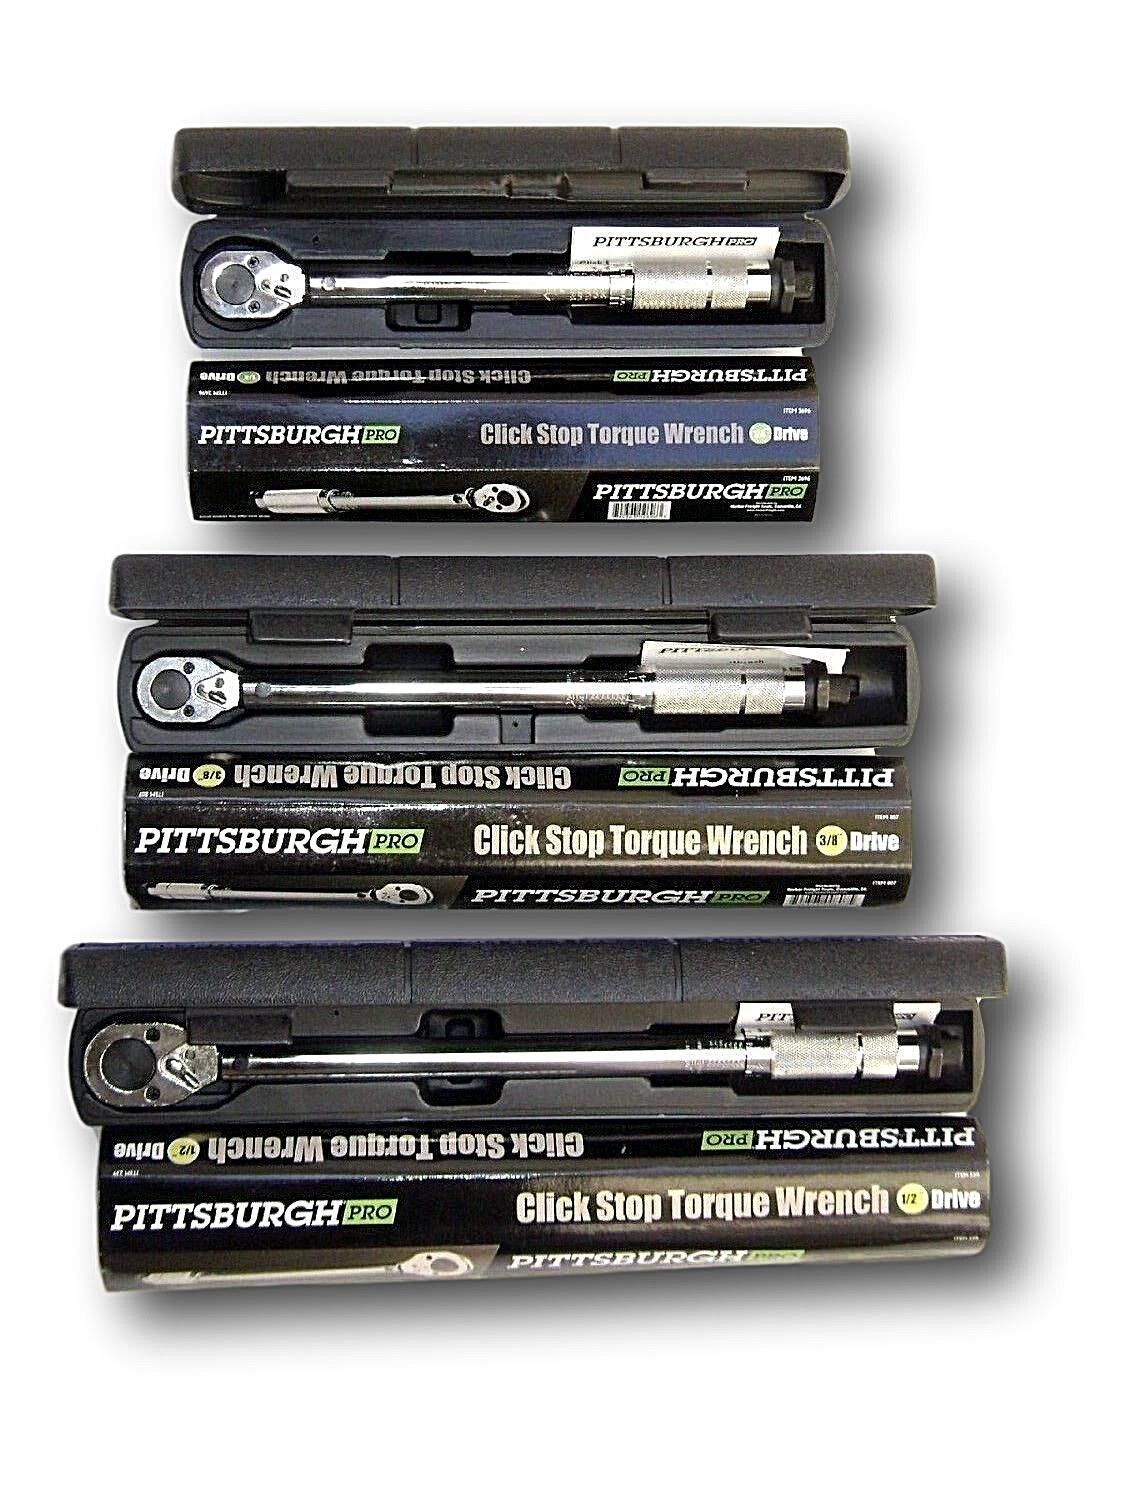 Of 3  Pro Reversible Click Type Torque Wrench Sizes 1/4", 3/